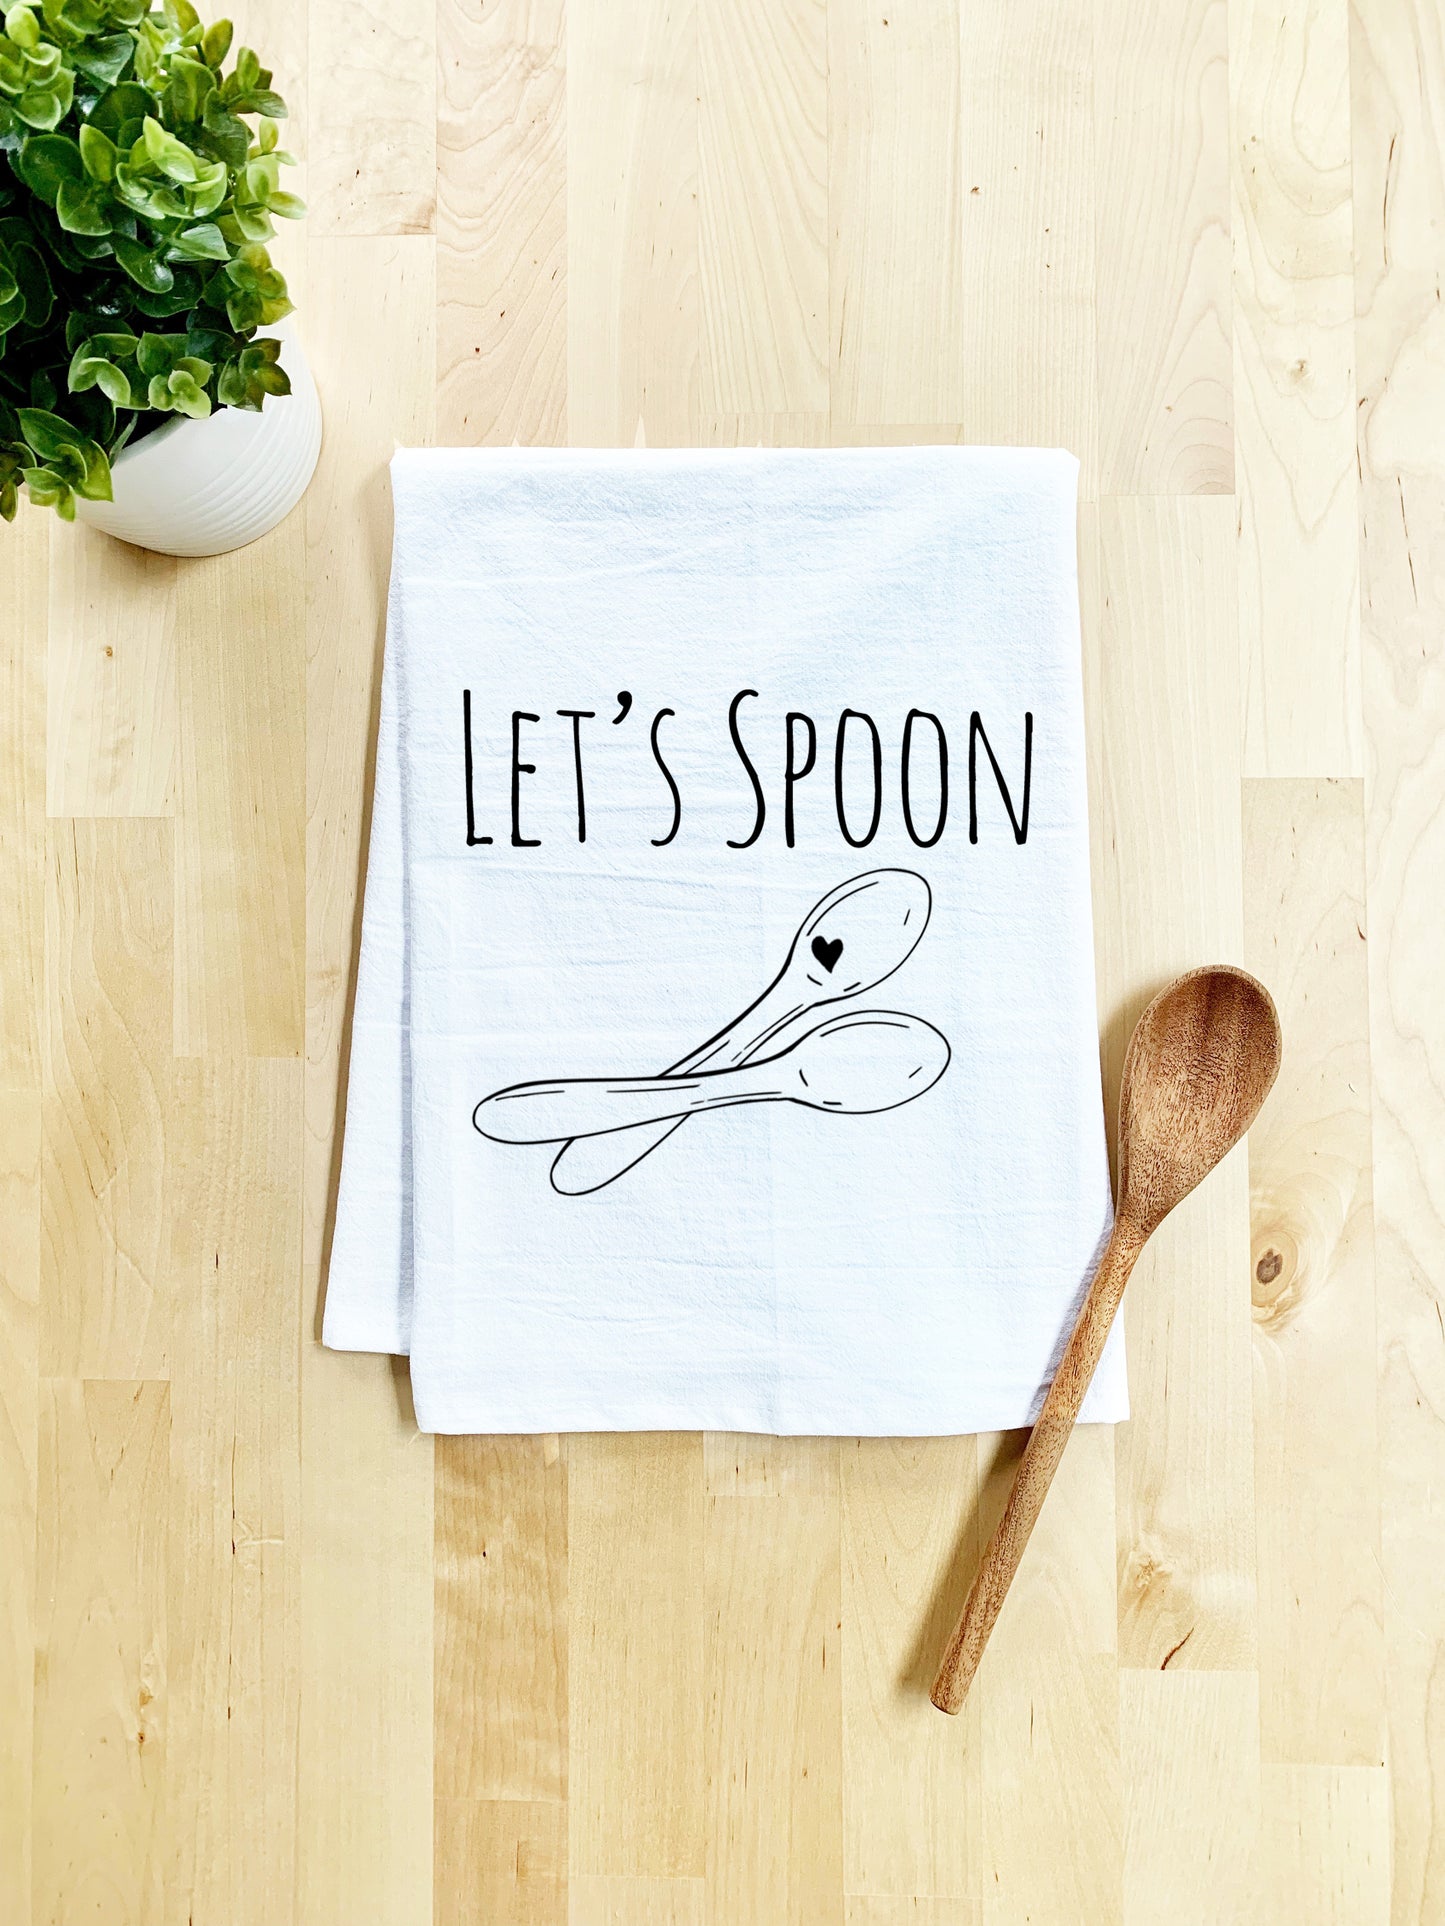 a kitchen towel that says let's spoon on it next to a wooden spoon